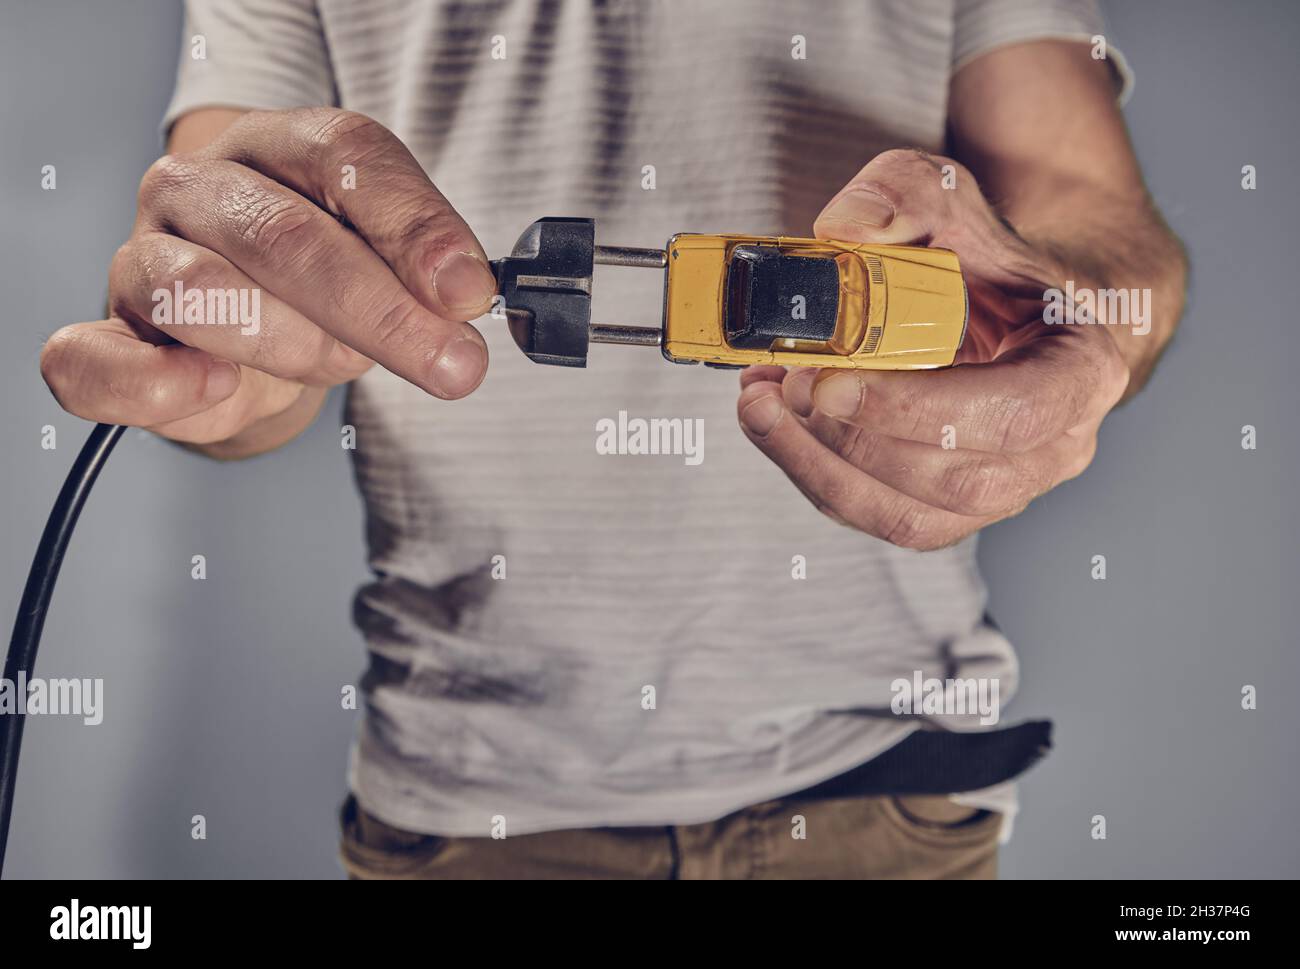 Man with toy car and electricity plug Stock Photo